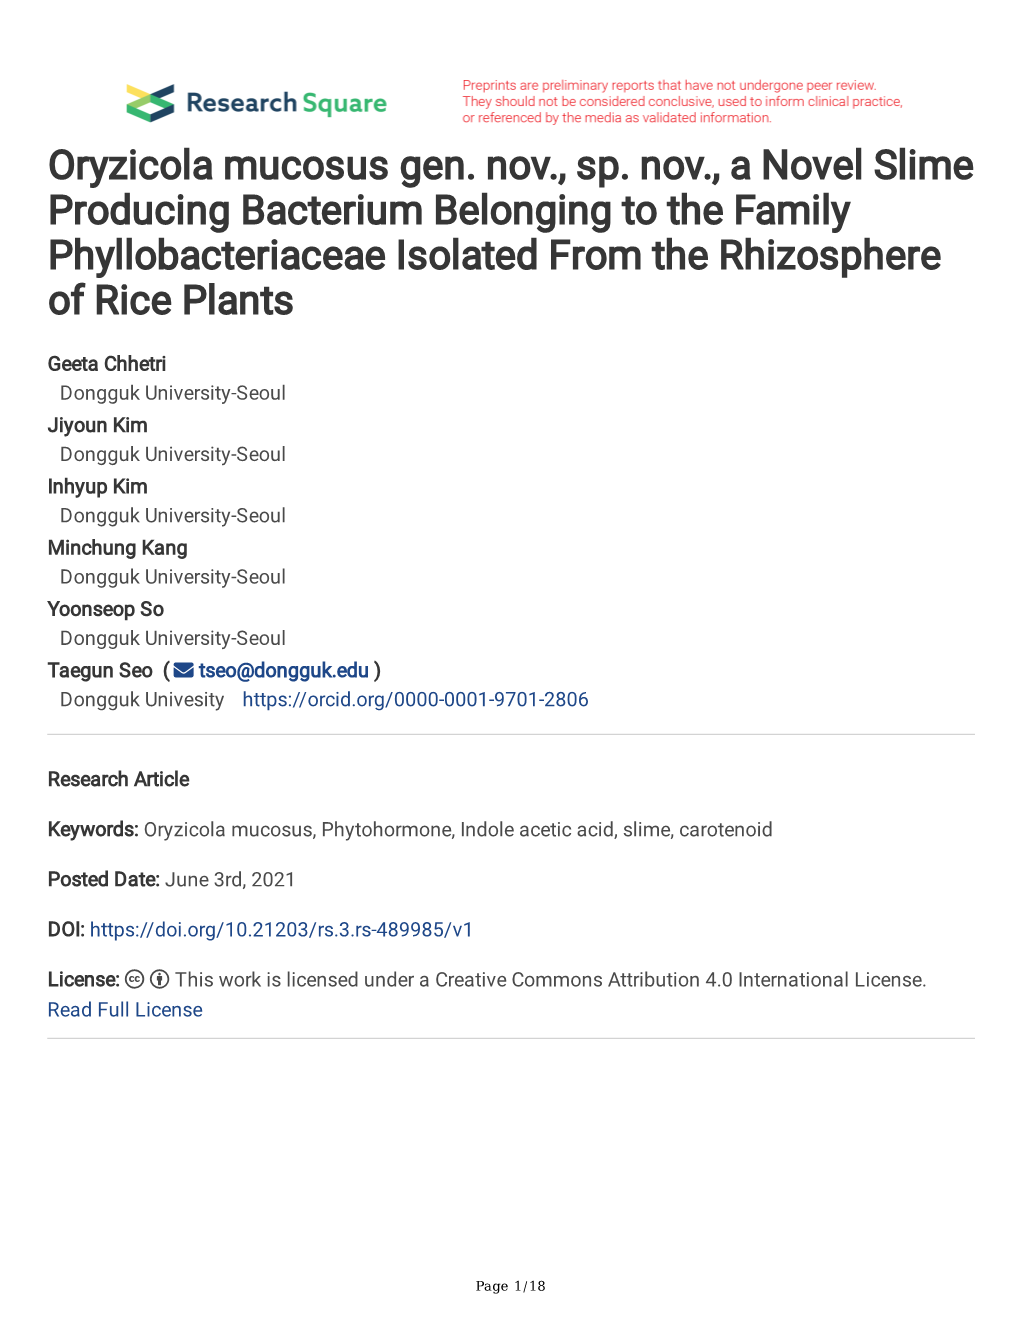 Oryzicola Mucosus Gen. Nov., Sp. Nov., a Novel Slime Producing Bacterium Belonging to the Family Phyllobacteriaceae Isolated from the Rhizosphere of Rice Plants